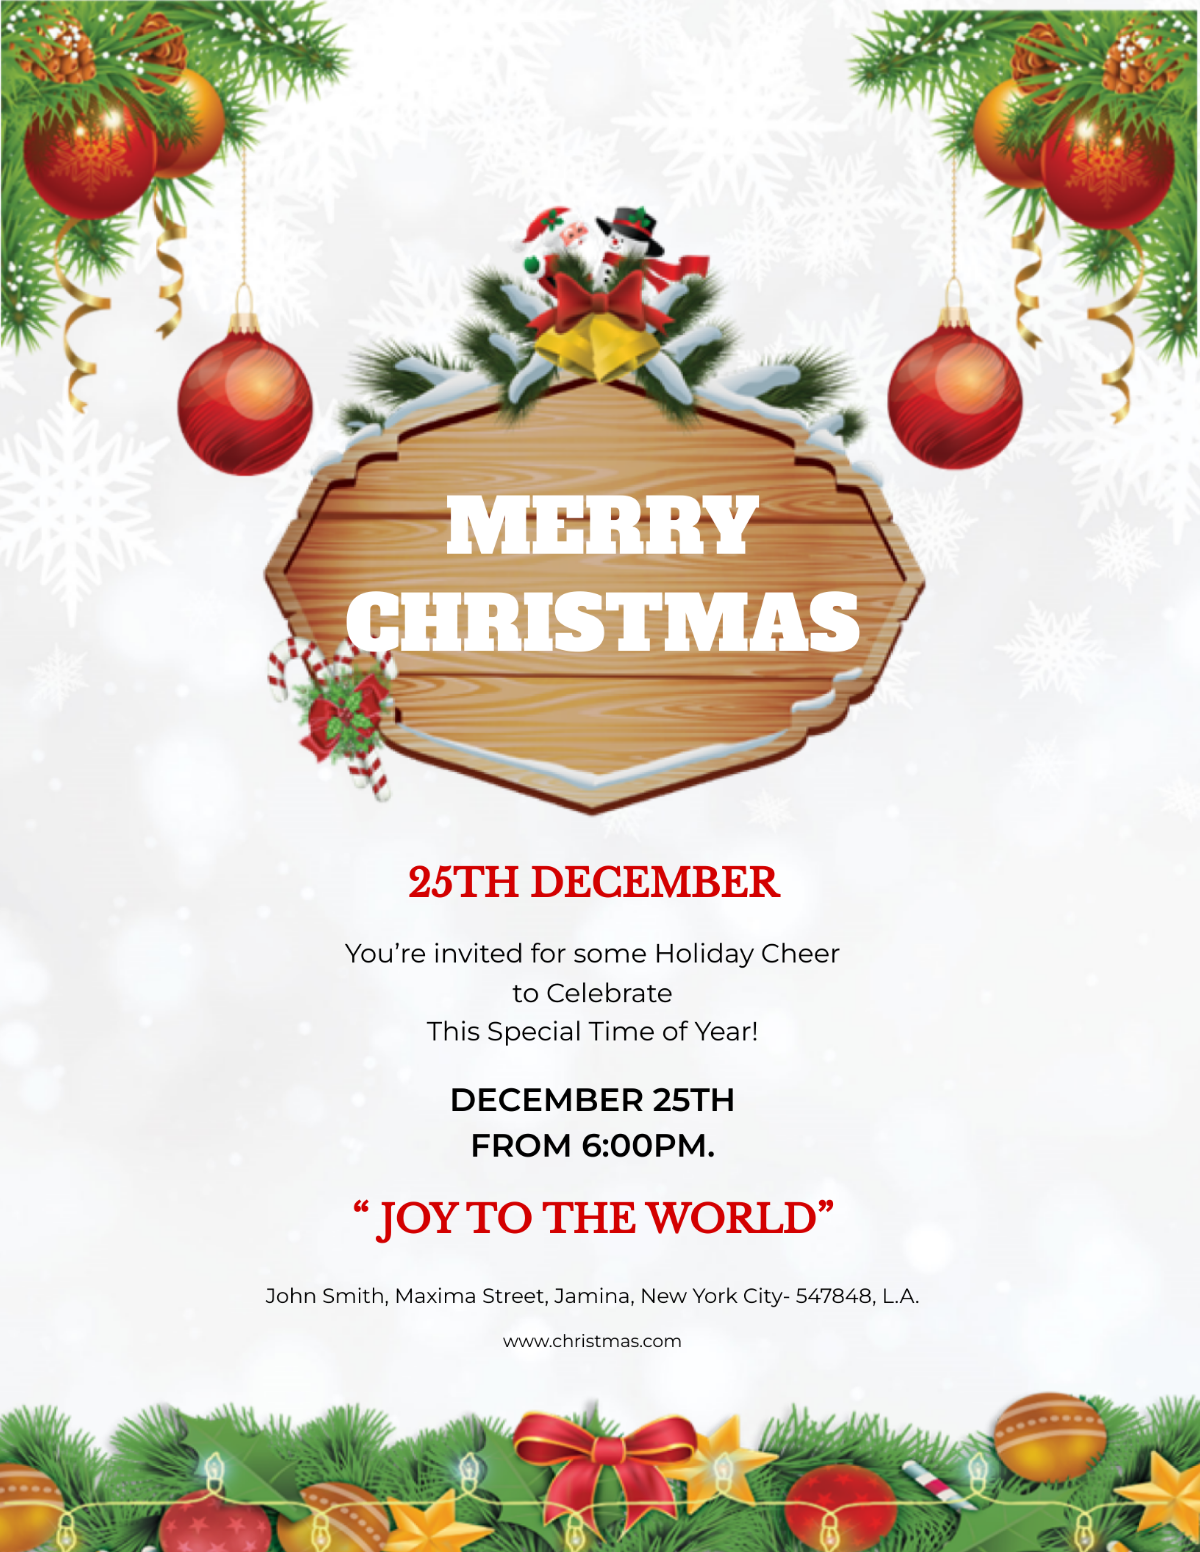 FREE Christmas Invitation - Edit Online & Download | Template.net